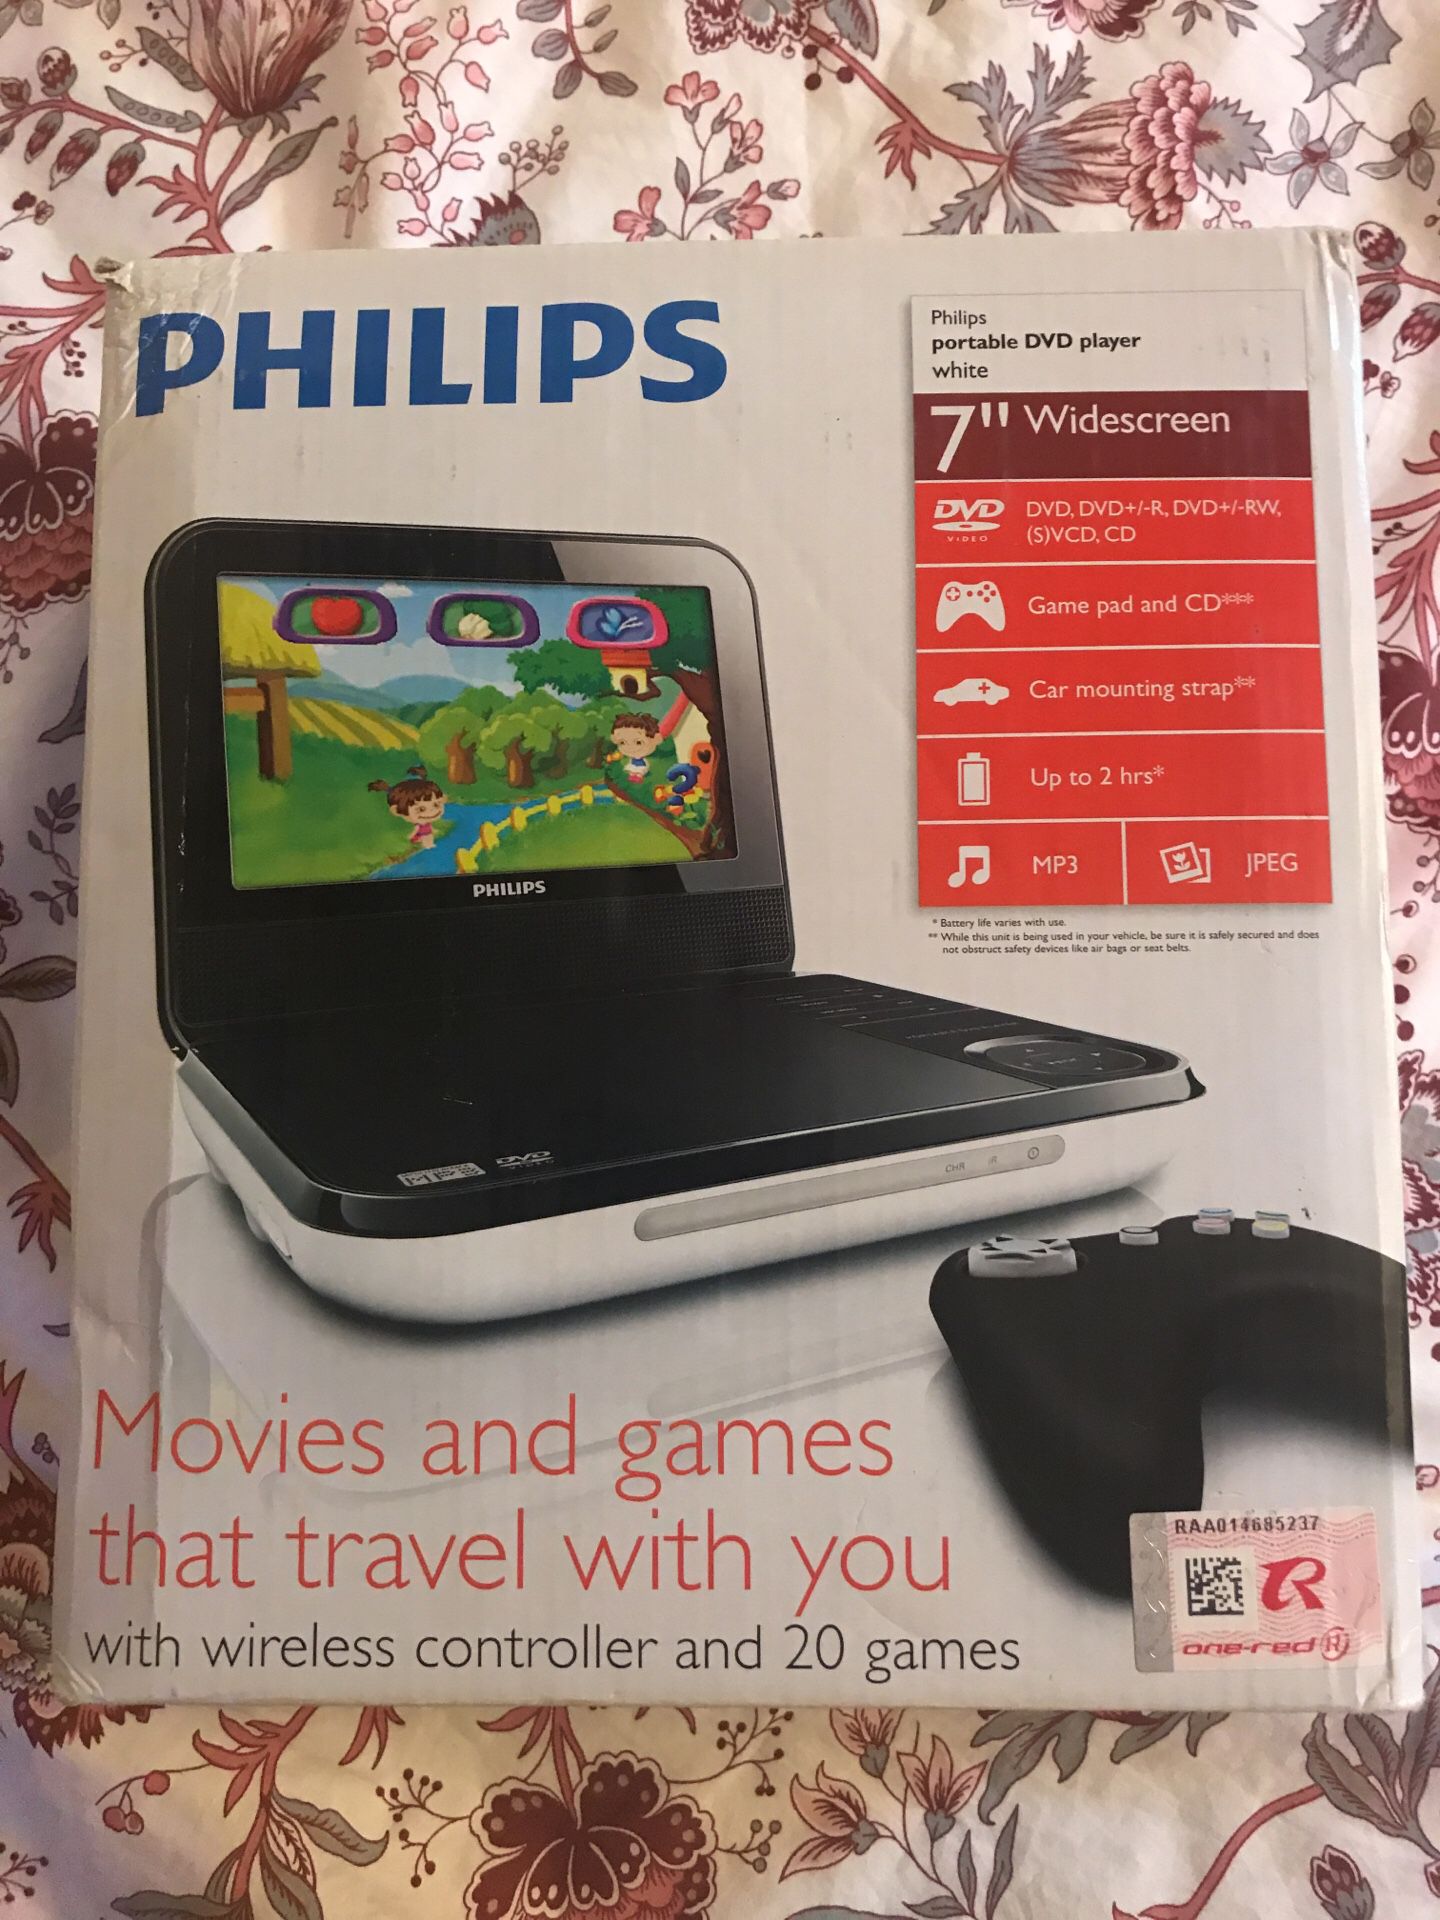 PHILIPS portable DVD player